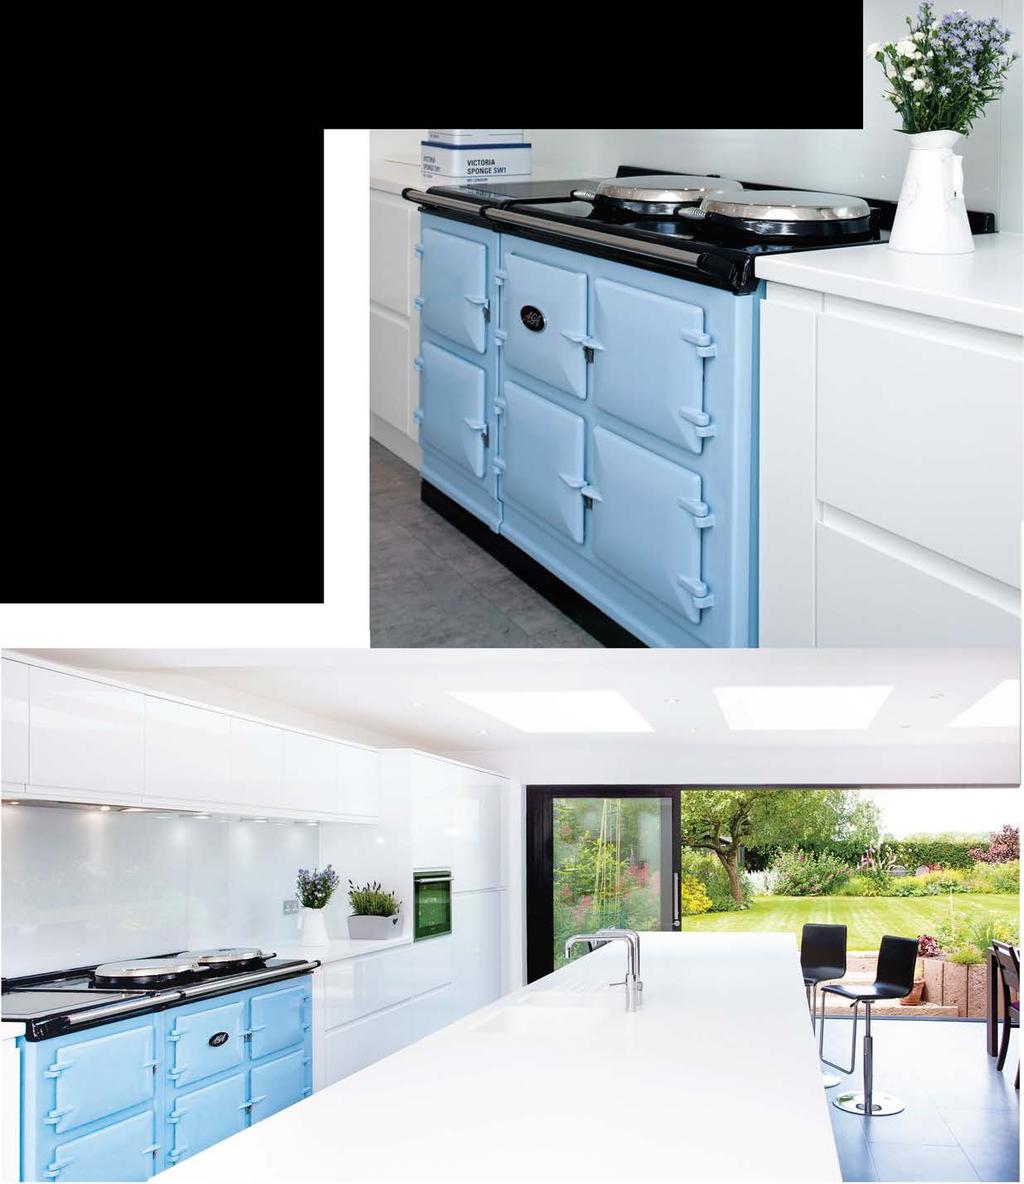 THE AGA TOTAL CONTROL IS AN AGA HEAT STORAGE COOKER WITH GREAT FLEXIBILITY FOR 21ST CENTURY LIVING - A BRITISH ICON REDEFINED. Cl '.